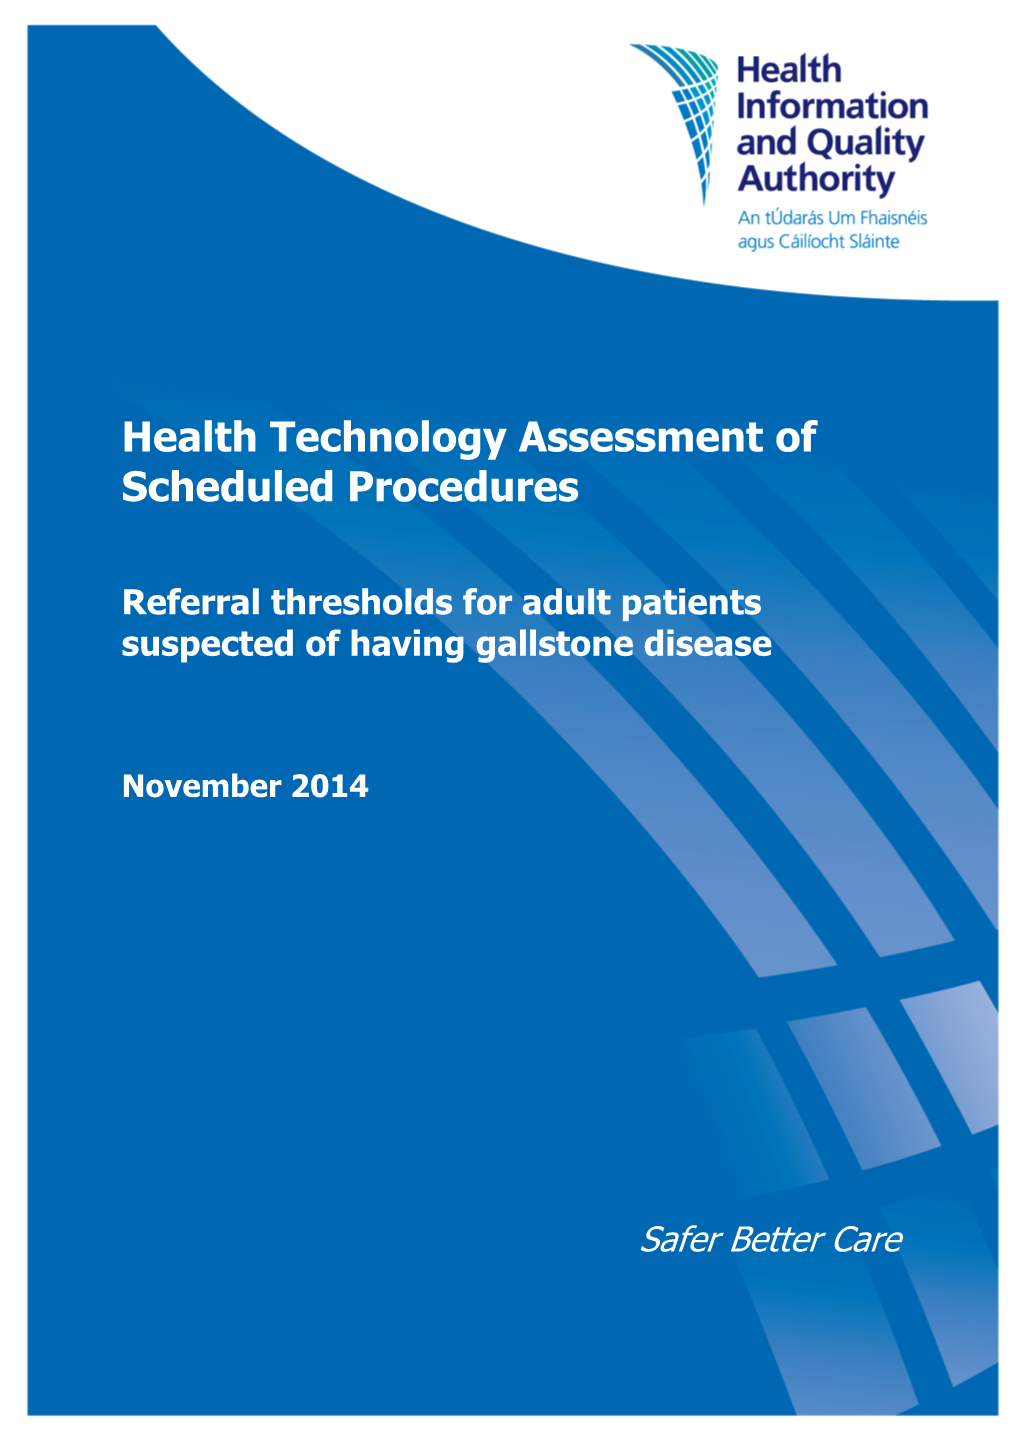 Health Technology Assessment of Scheduled Procedures: Gallstone Disease Health Information and Quality Authority